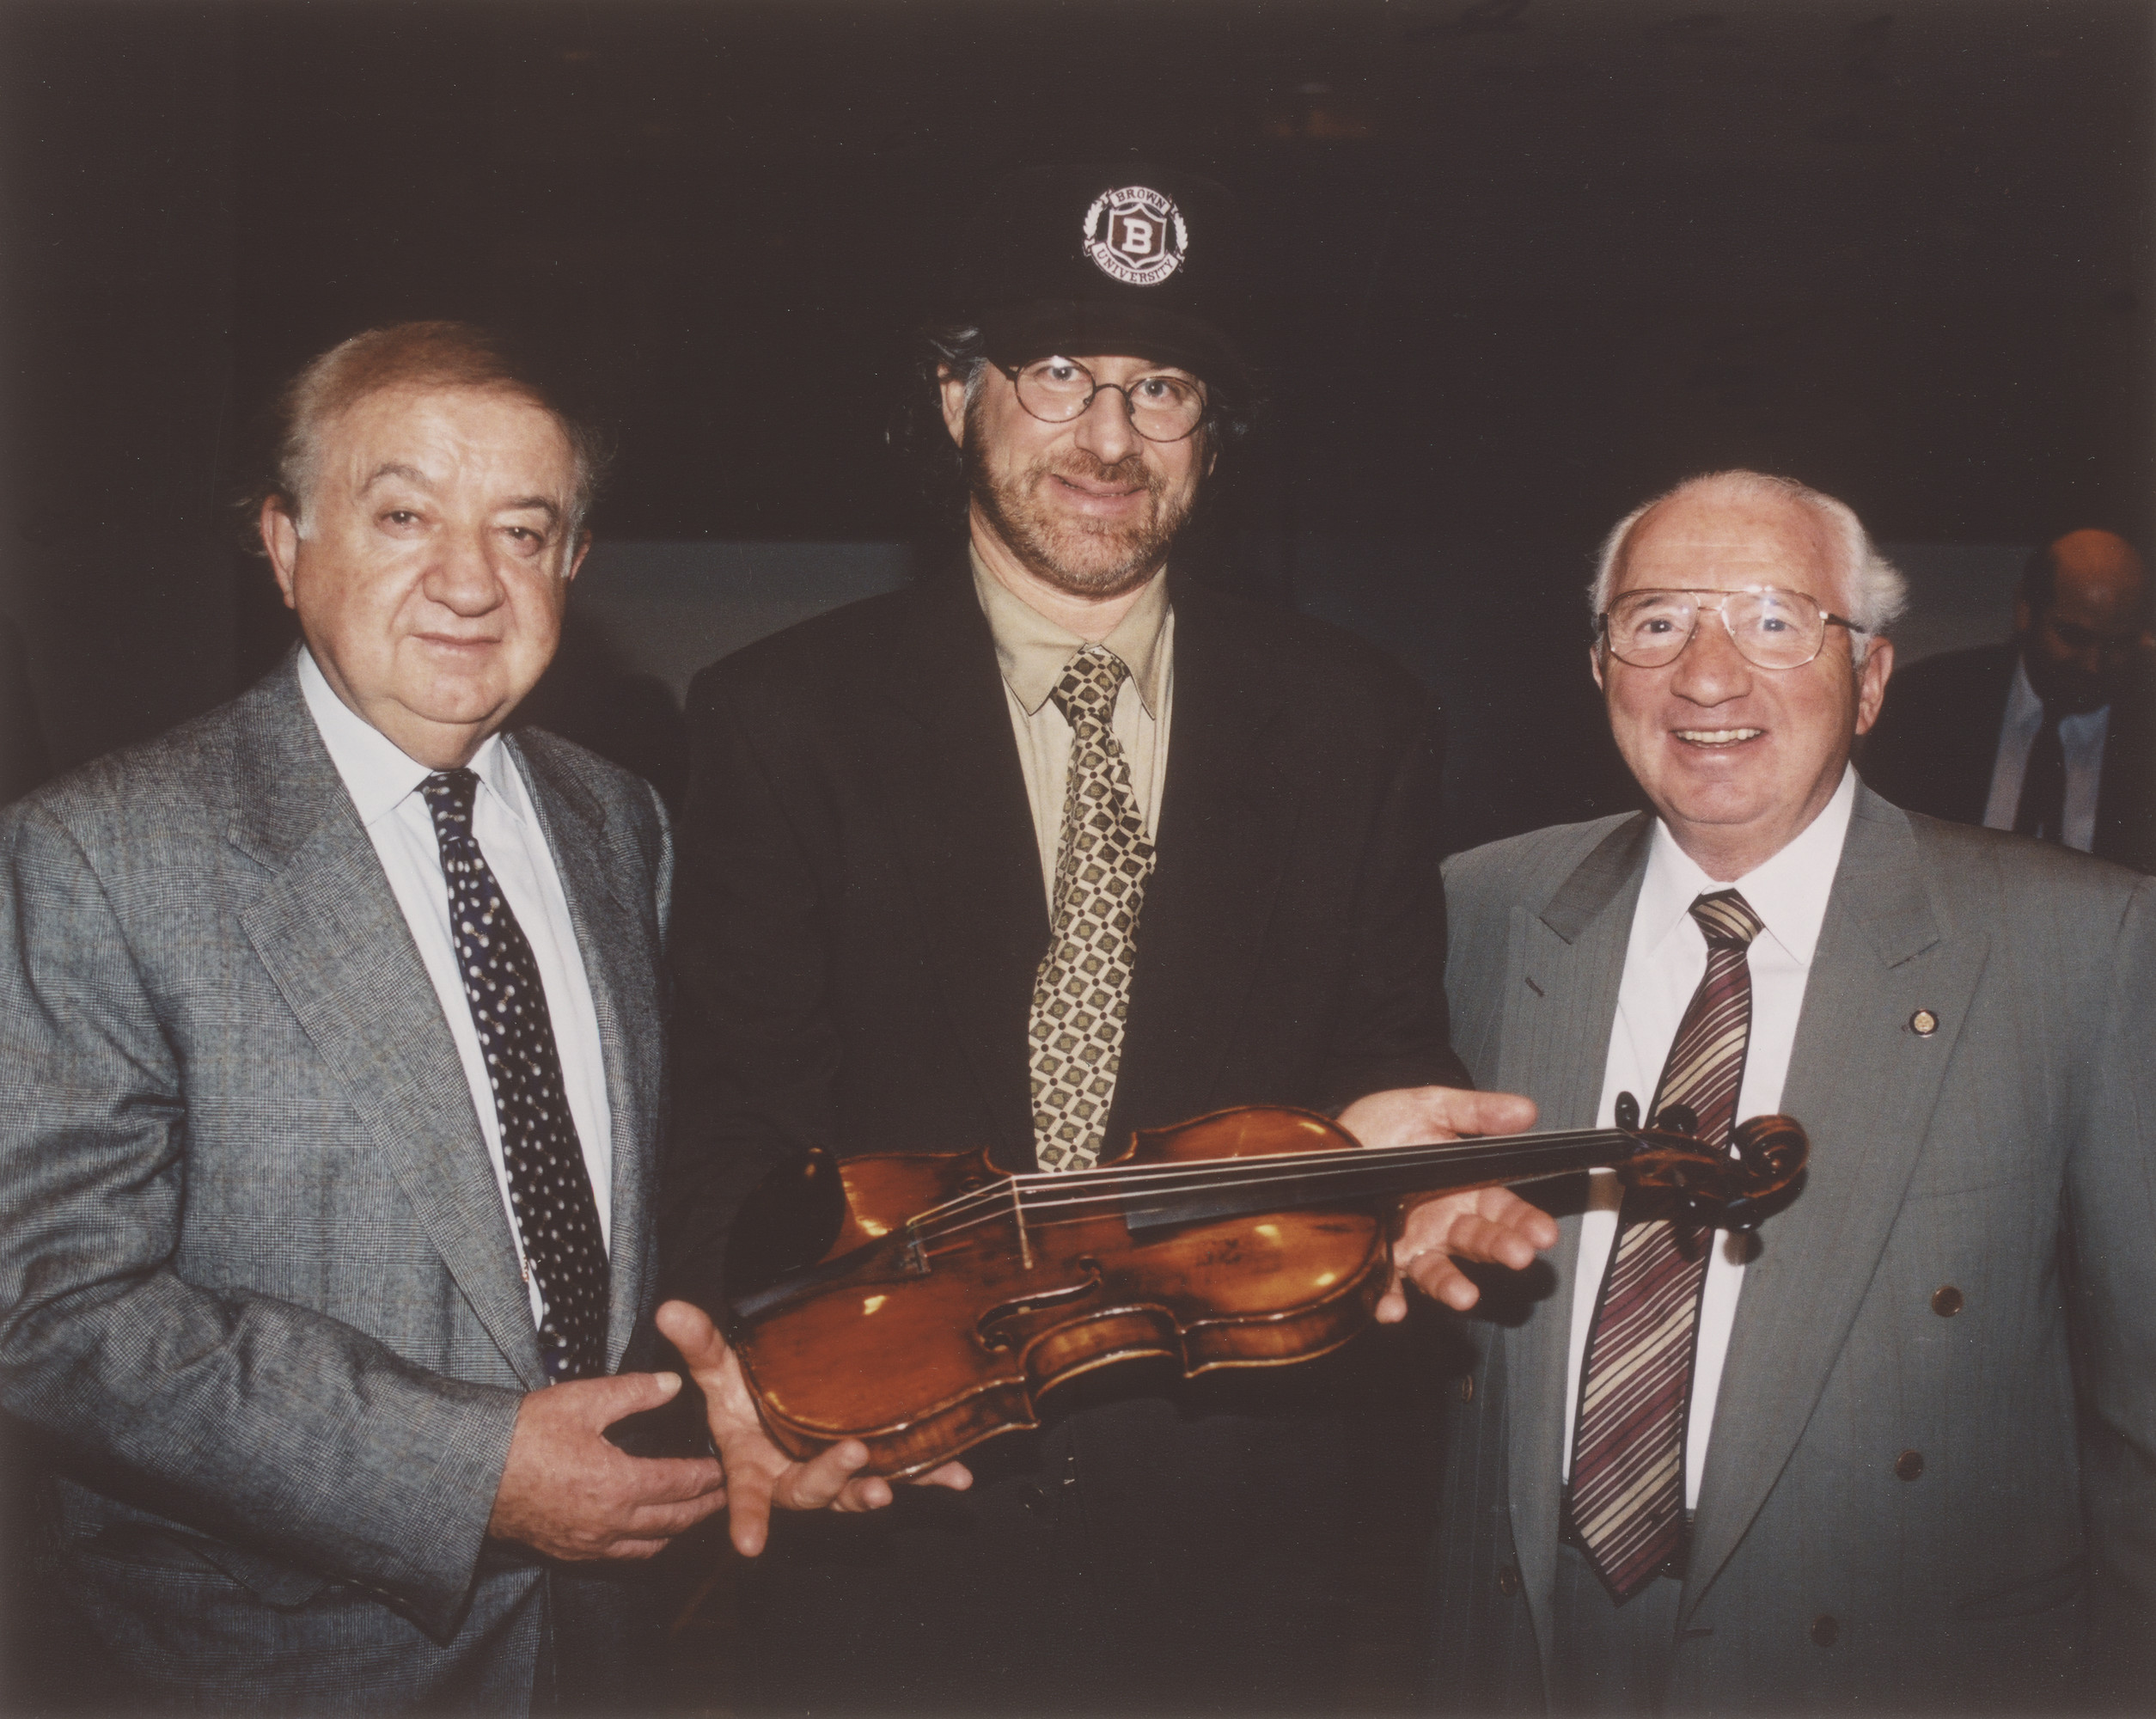 Steven Spielberg accepting the 'Schindler violin' (Henry Rosner's) on behalf of the USHMM. The violin was donated by Murray Pantirer and Abraham Zuckerman.